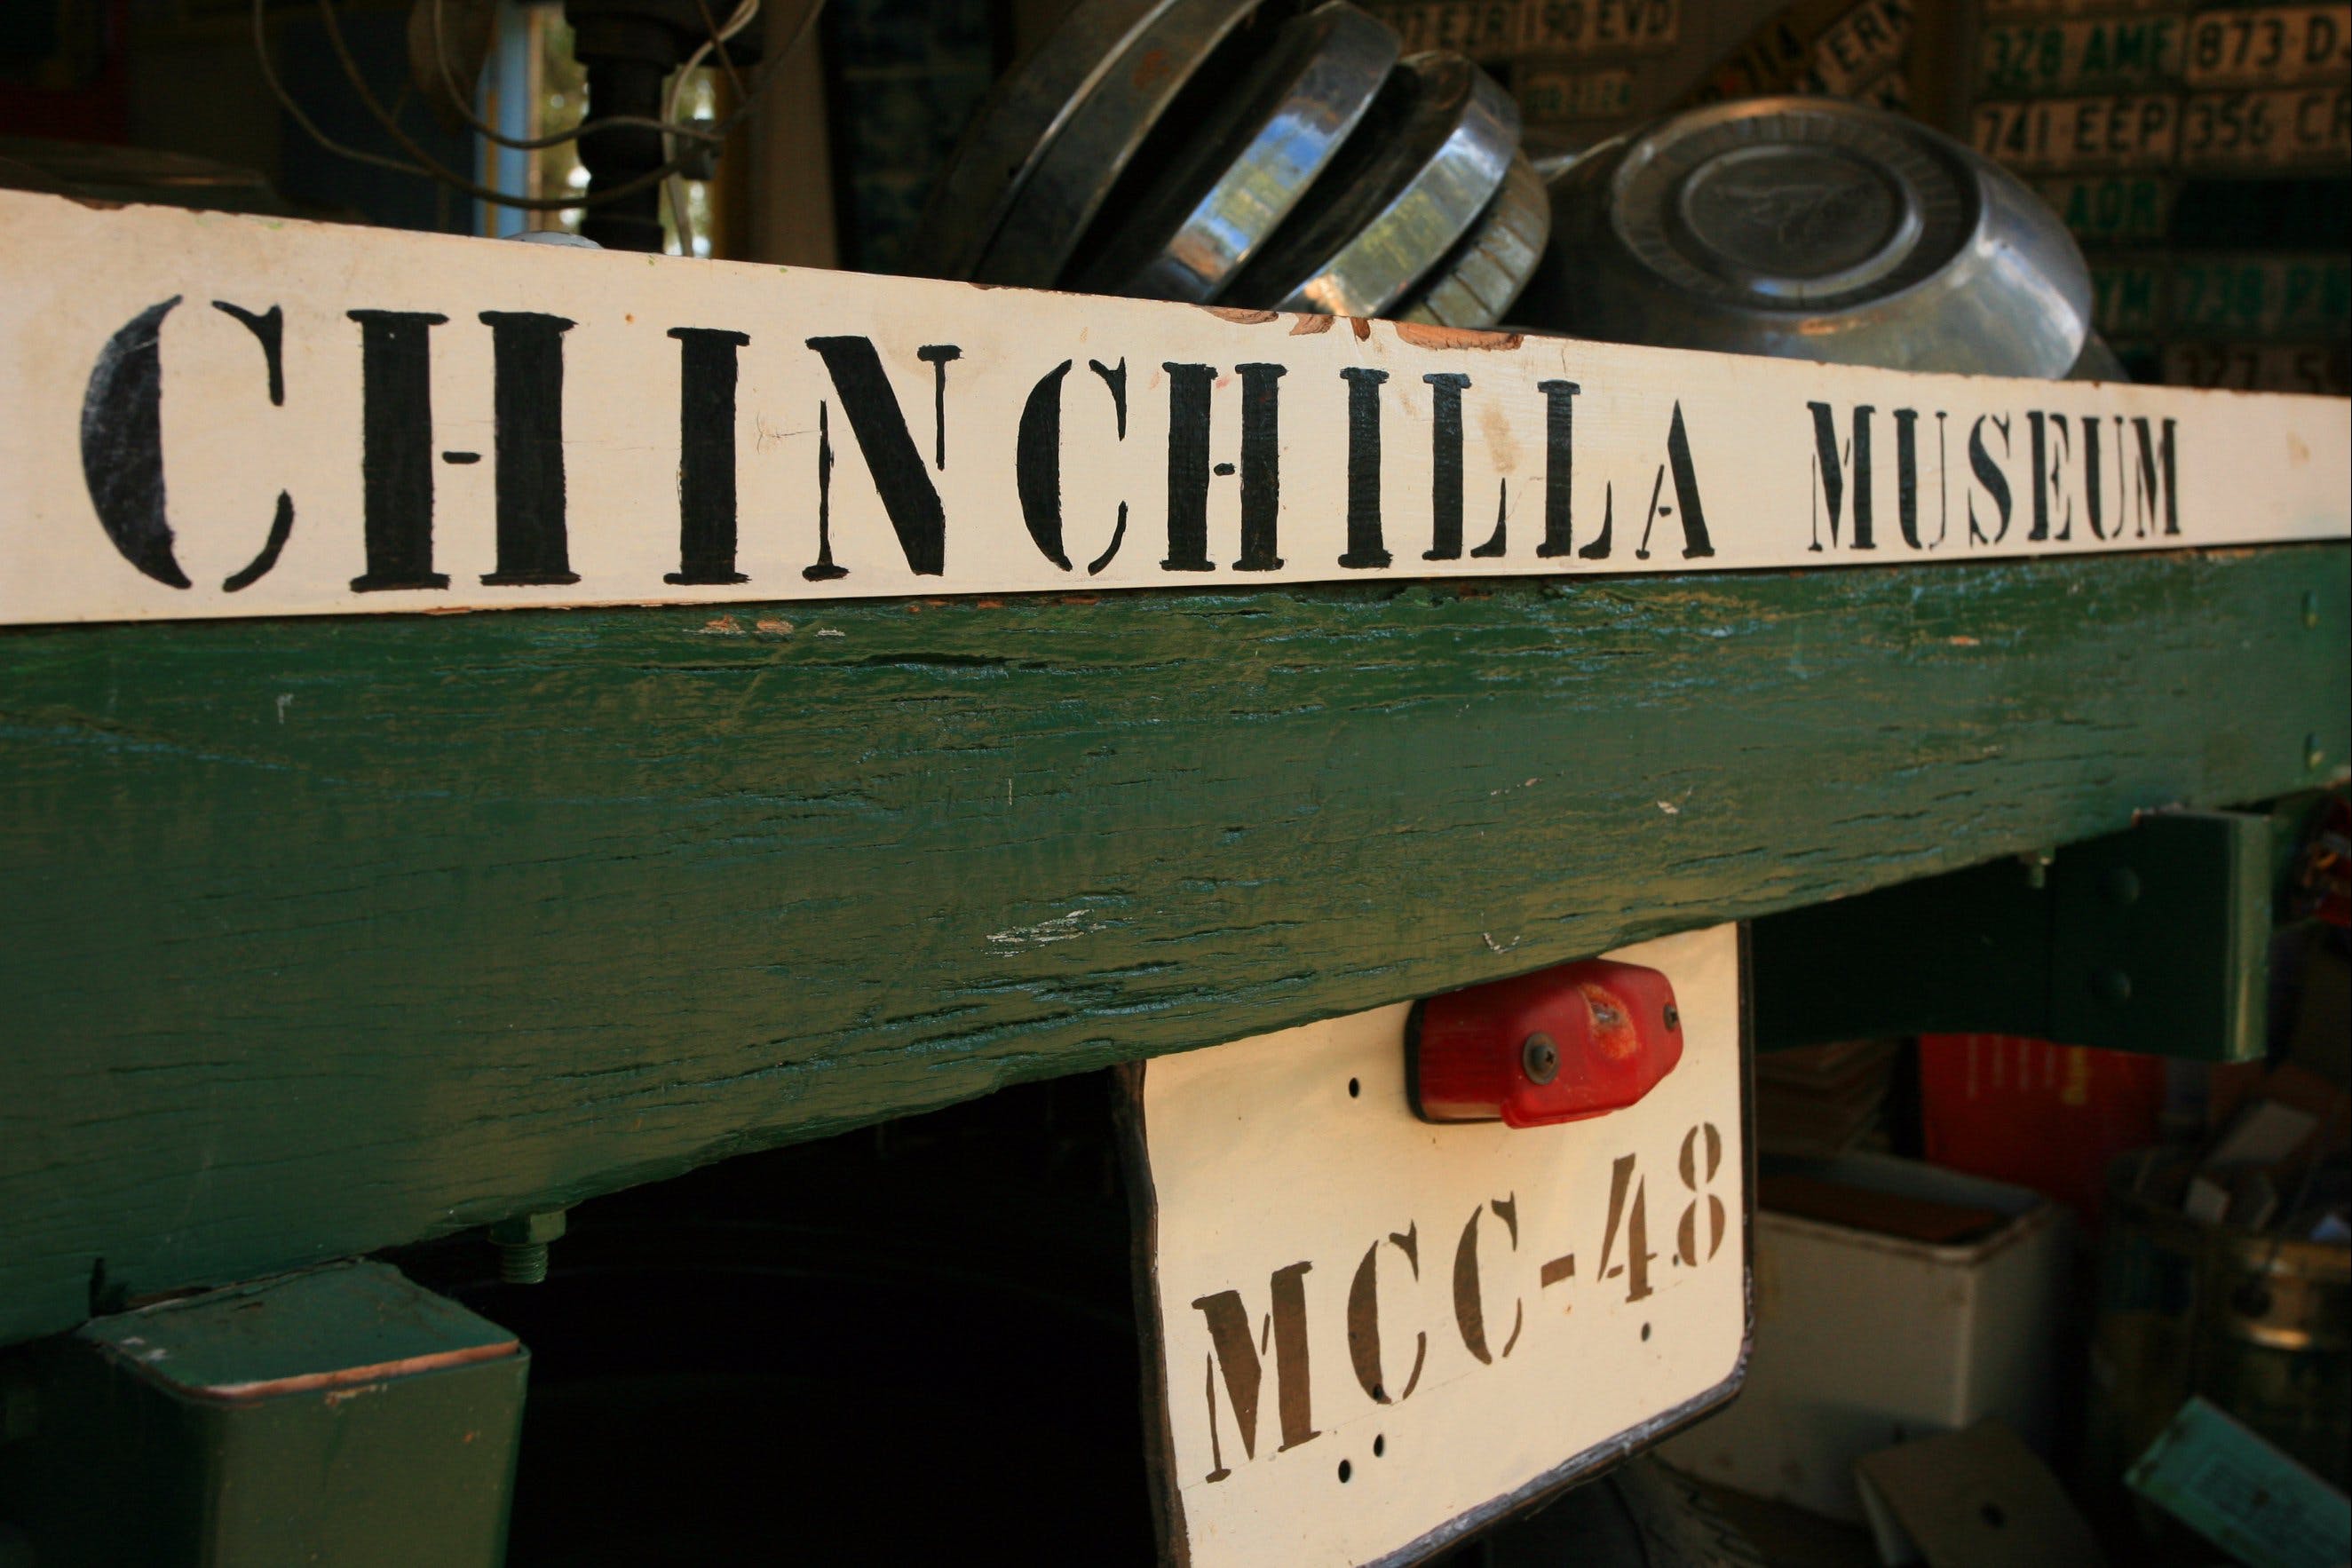 Chinchilla Historical Museum - Attractions Sydney